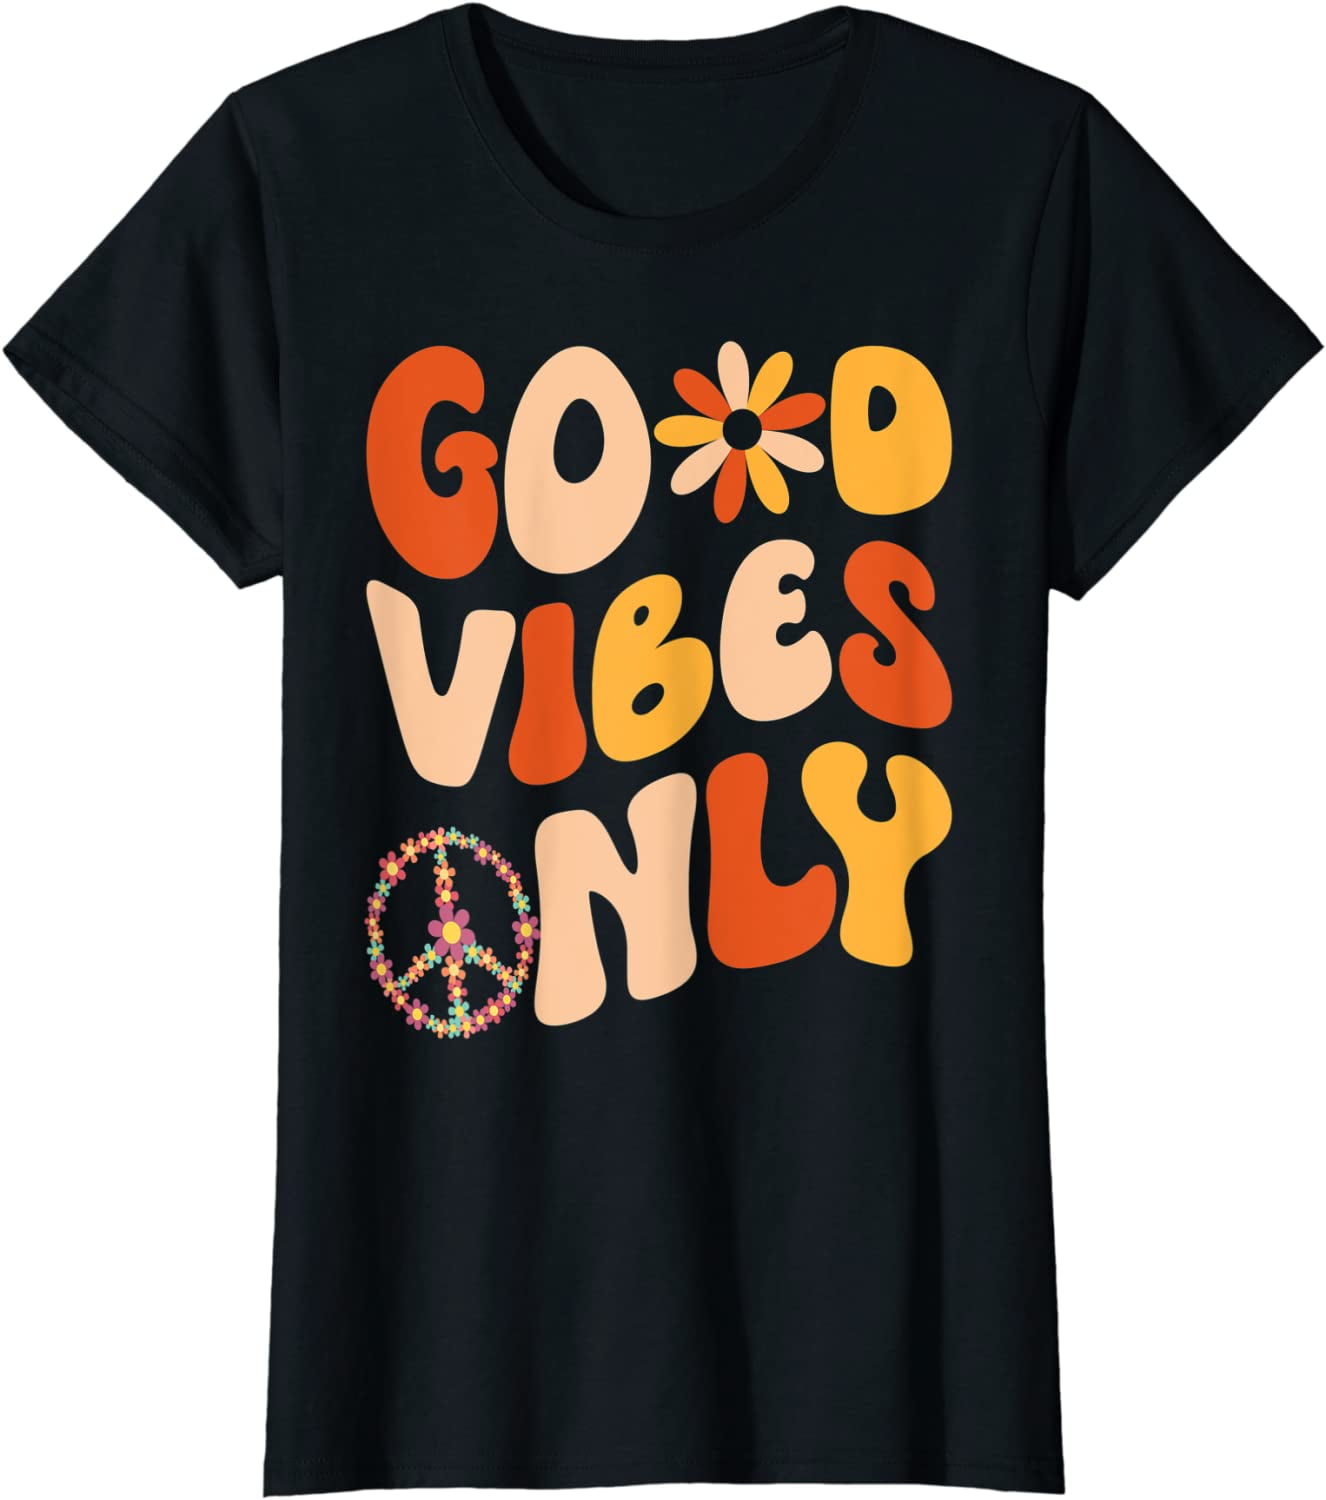 GOOD VIBES ONLY PEACE LOVE 60s 70s Tie Dye Groovy Hippie Gift T-Shirt ...